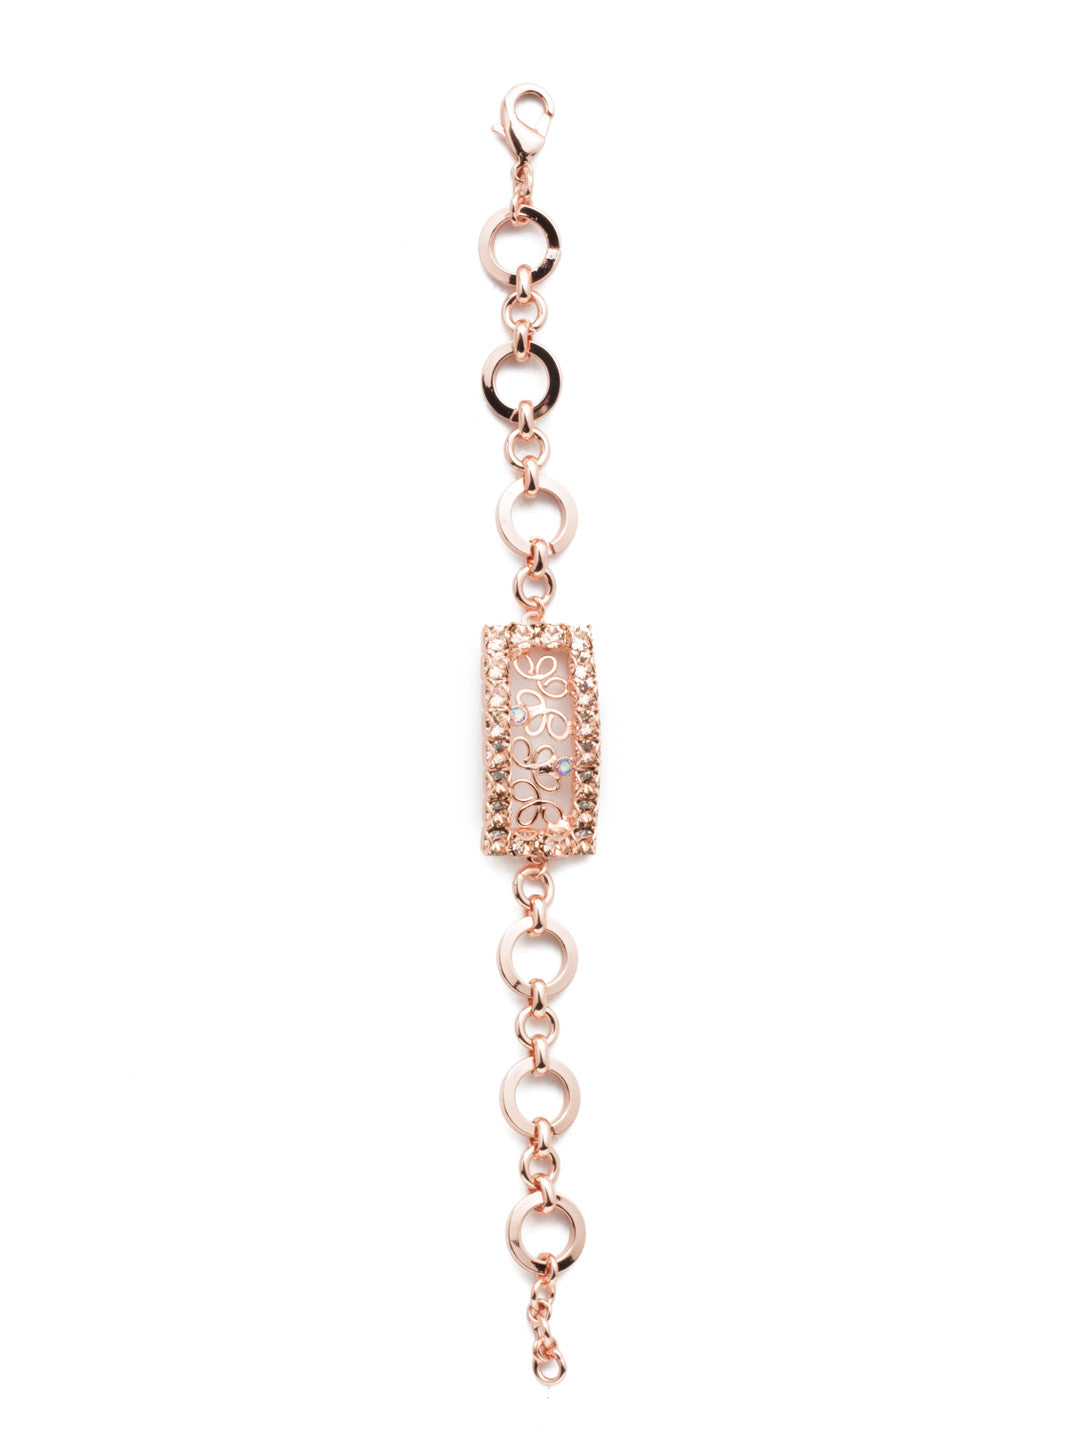 Ornella Tennis Bracelet - BES1RGLVP - <p>Wear the Ornella Tennis Bracelet with everyday fashions to take them up a notch. The hand-soldered metal detail at its center is rimmed with sparkling crystals for a stand-out effect. From Sorrelli's Lavender Peach collection in our Rose Gold-tone finish.</p>